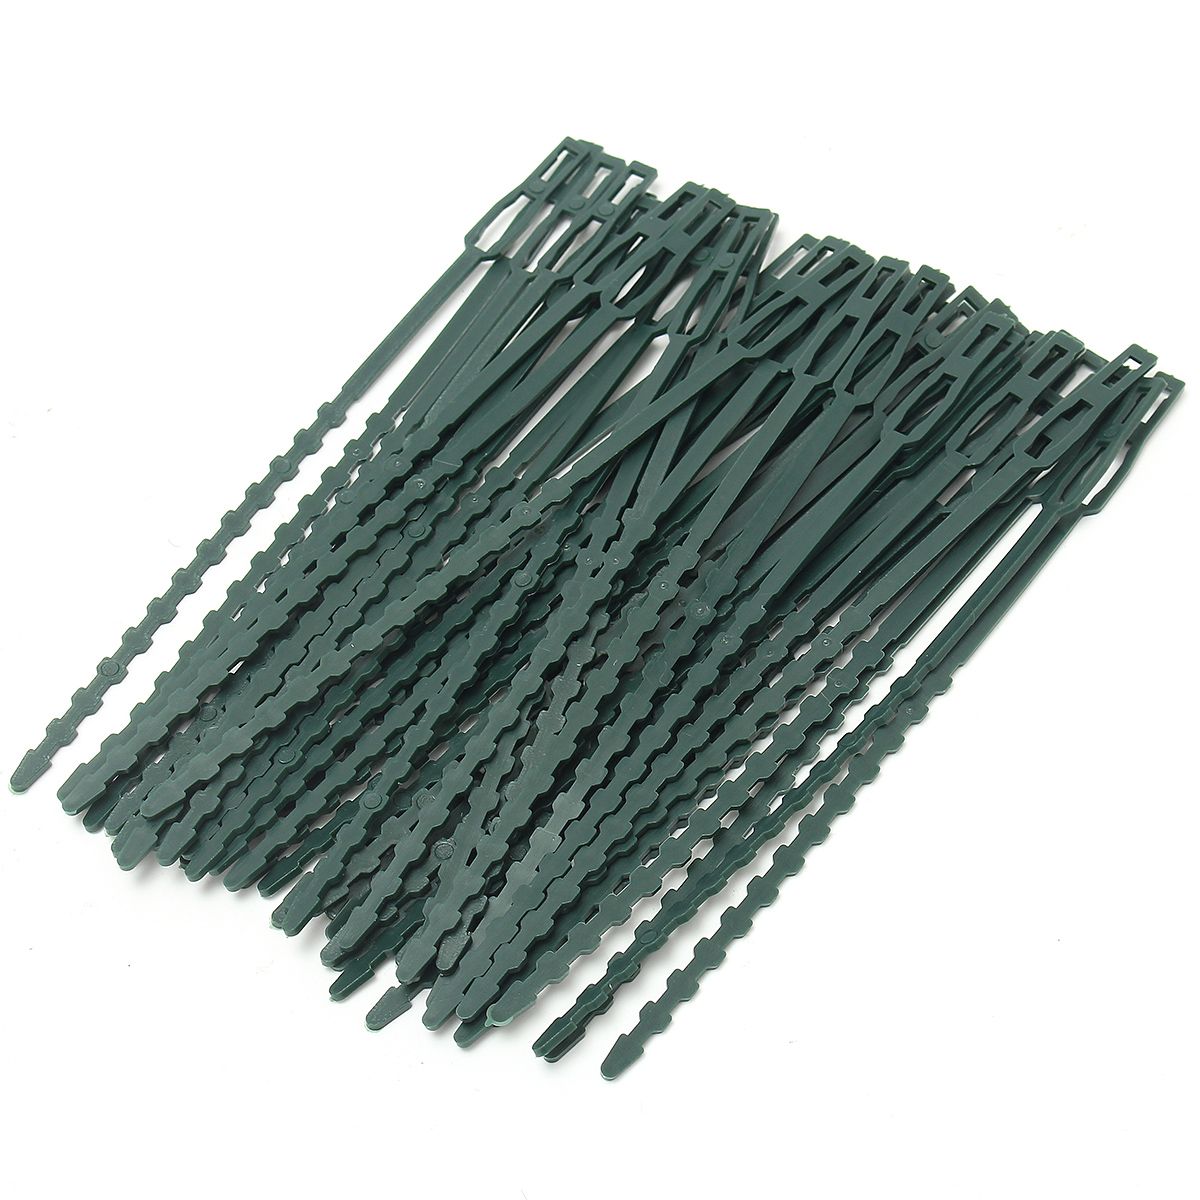 50Pcs-Reusable-Garden-Plastic-Plant-Cable-Ties-Straps-Adjustable-Tree-Climbing-Support-1172899